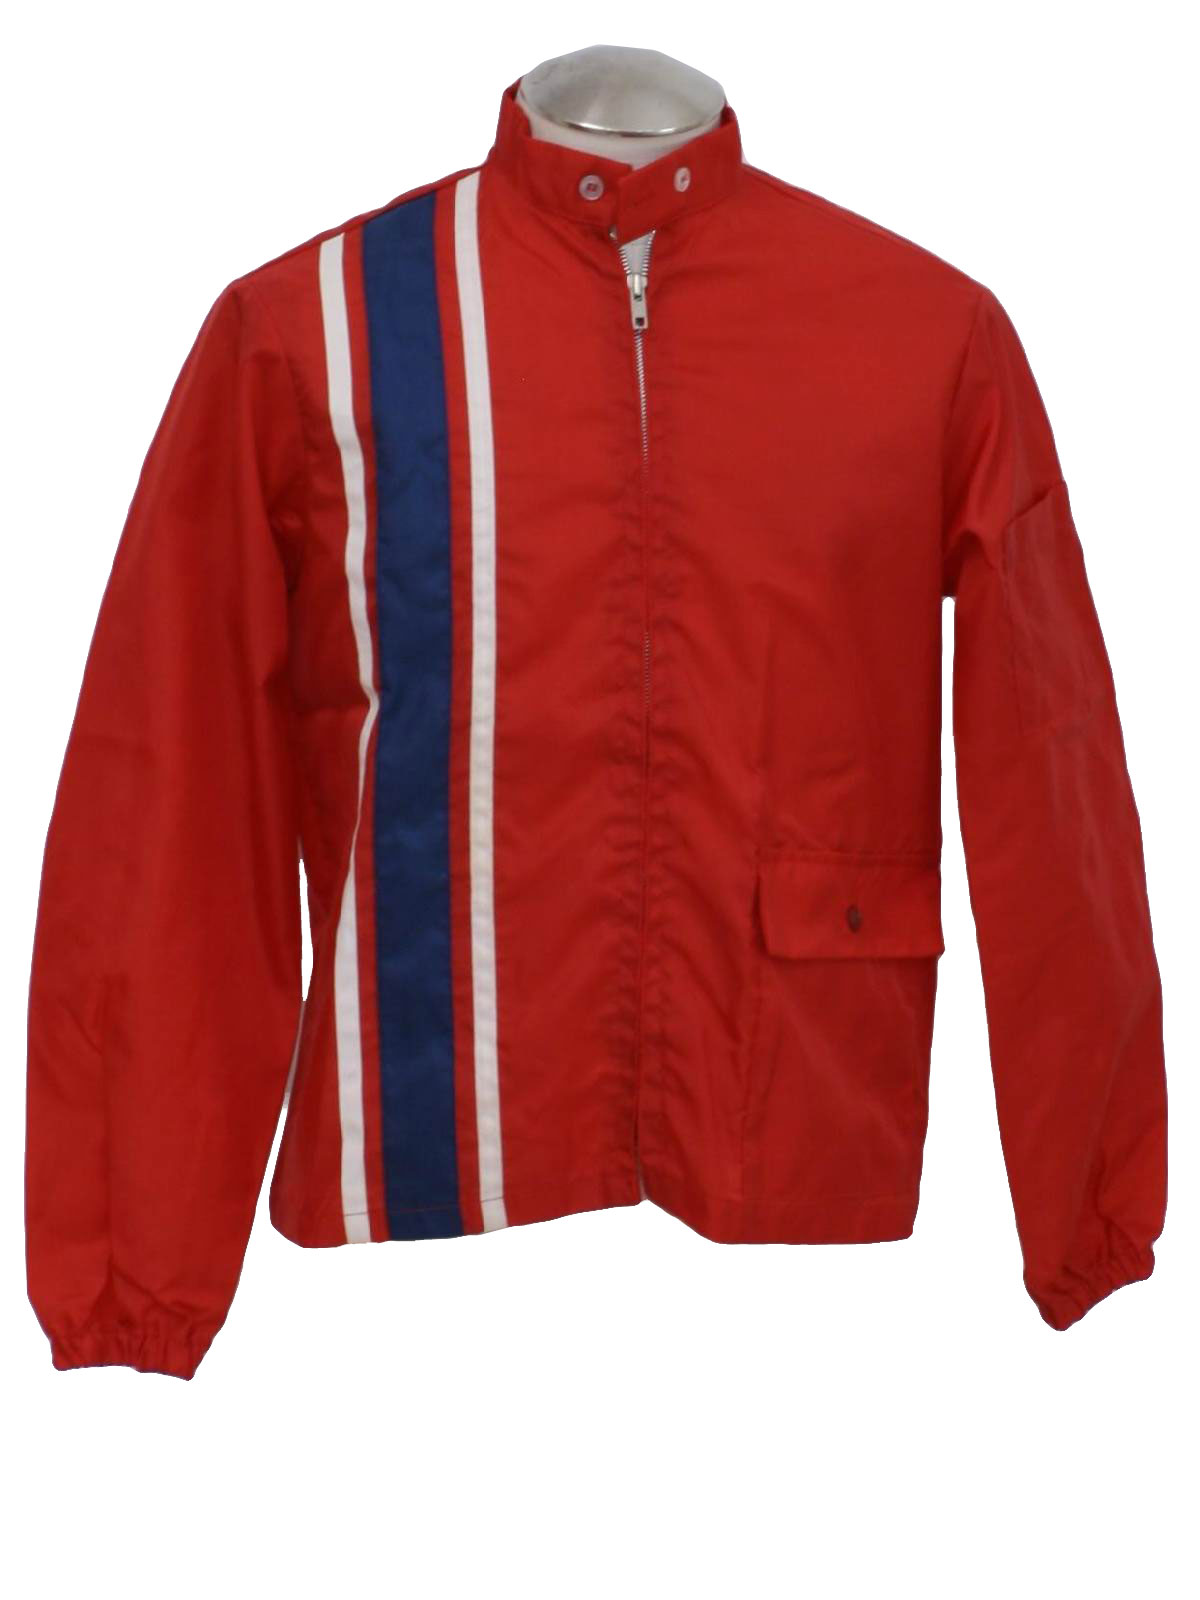 1970s Vintage Jacket: 70s -Swingster- Mens red, white and navy blue ...